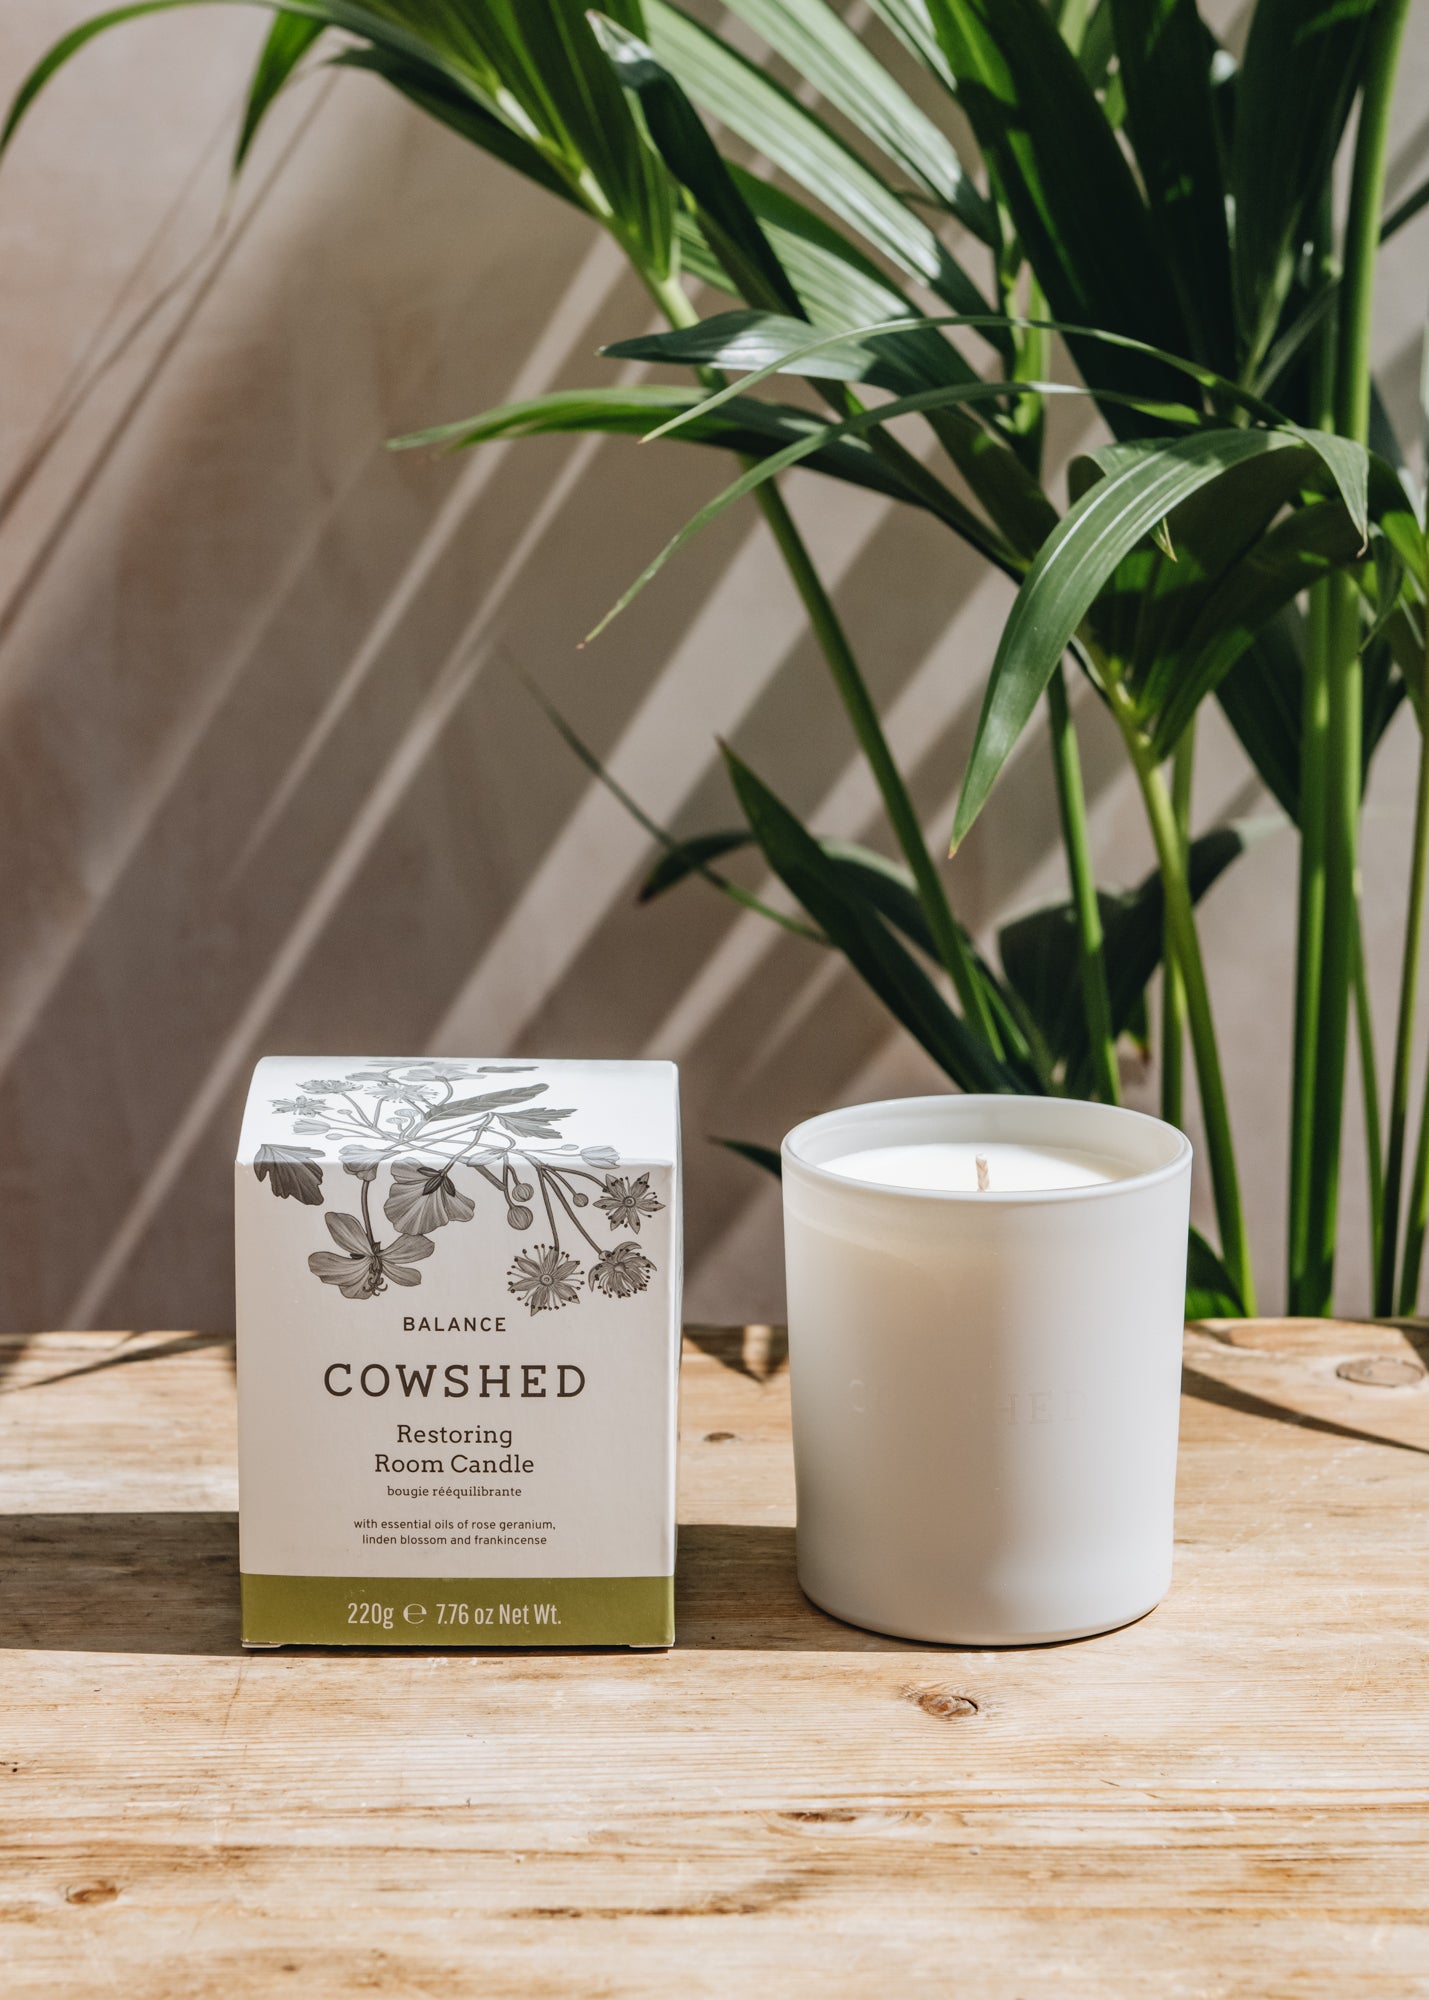 Cowshed Restoring Candle